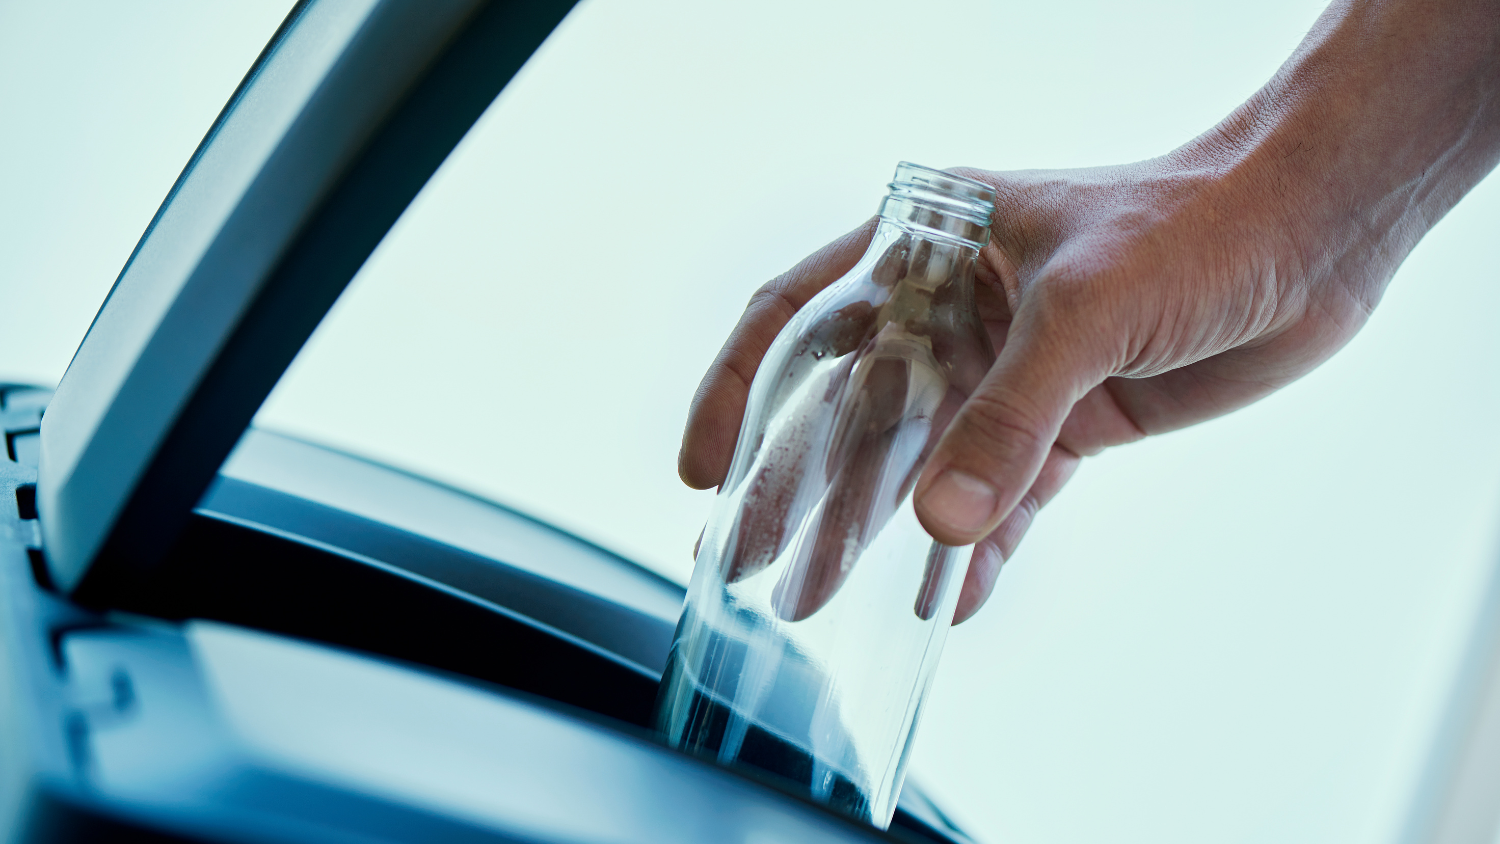 A close-up of a hand placing a glass bottle into a recycling can.